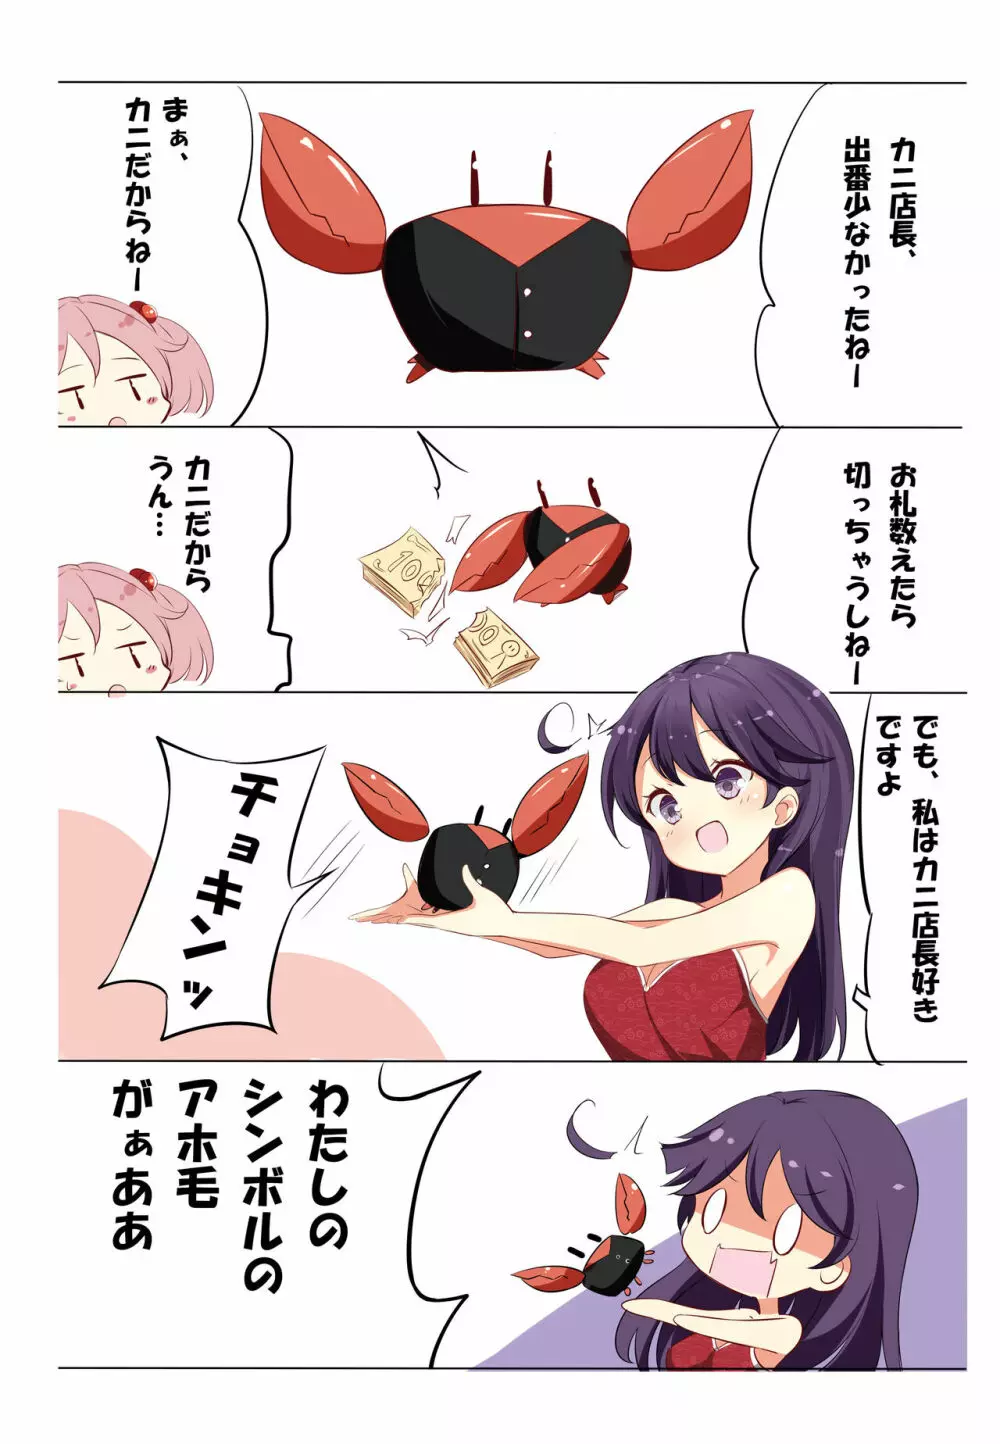 hamaken collection 総集編vol 9～12 プラス 七駆の乳くらべ Page.31